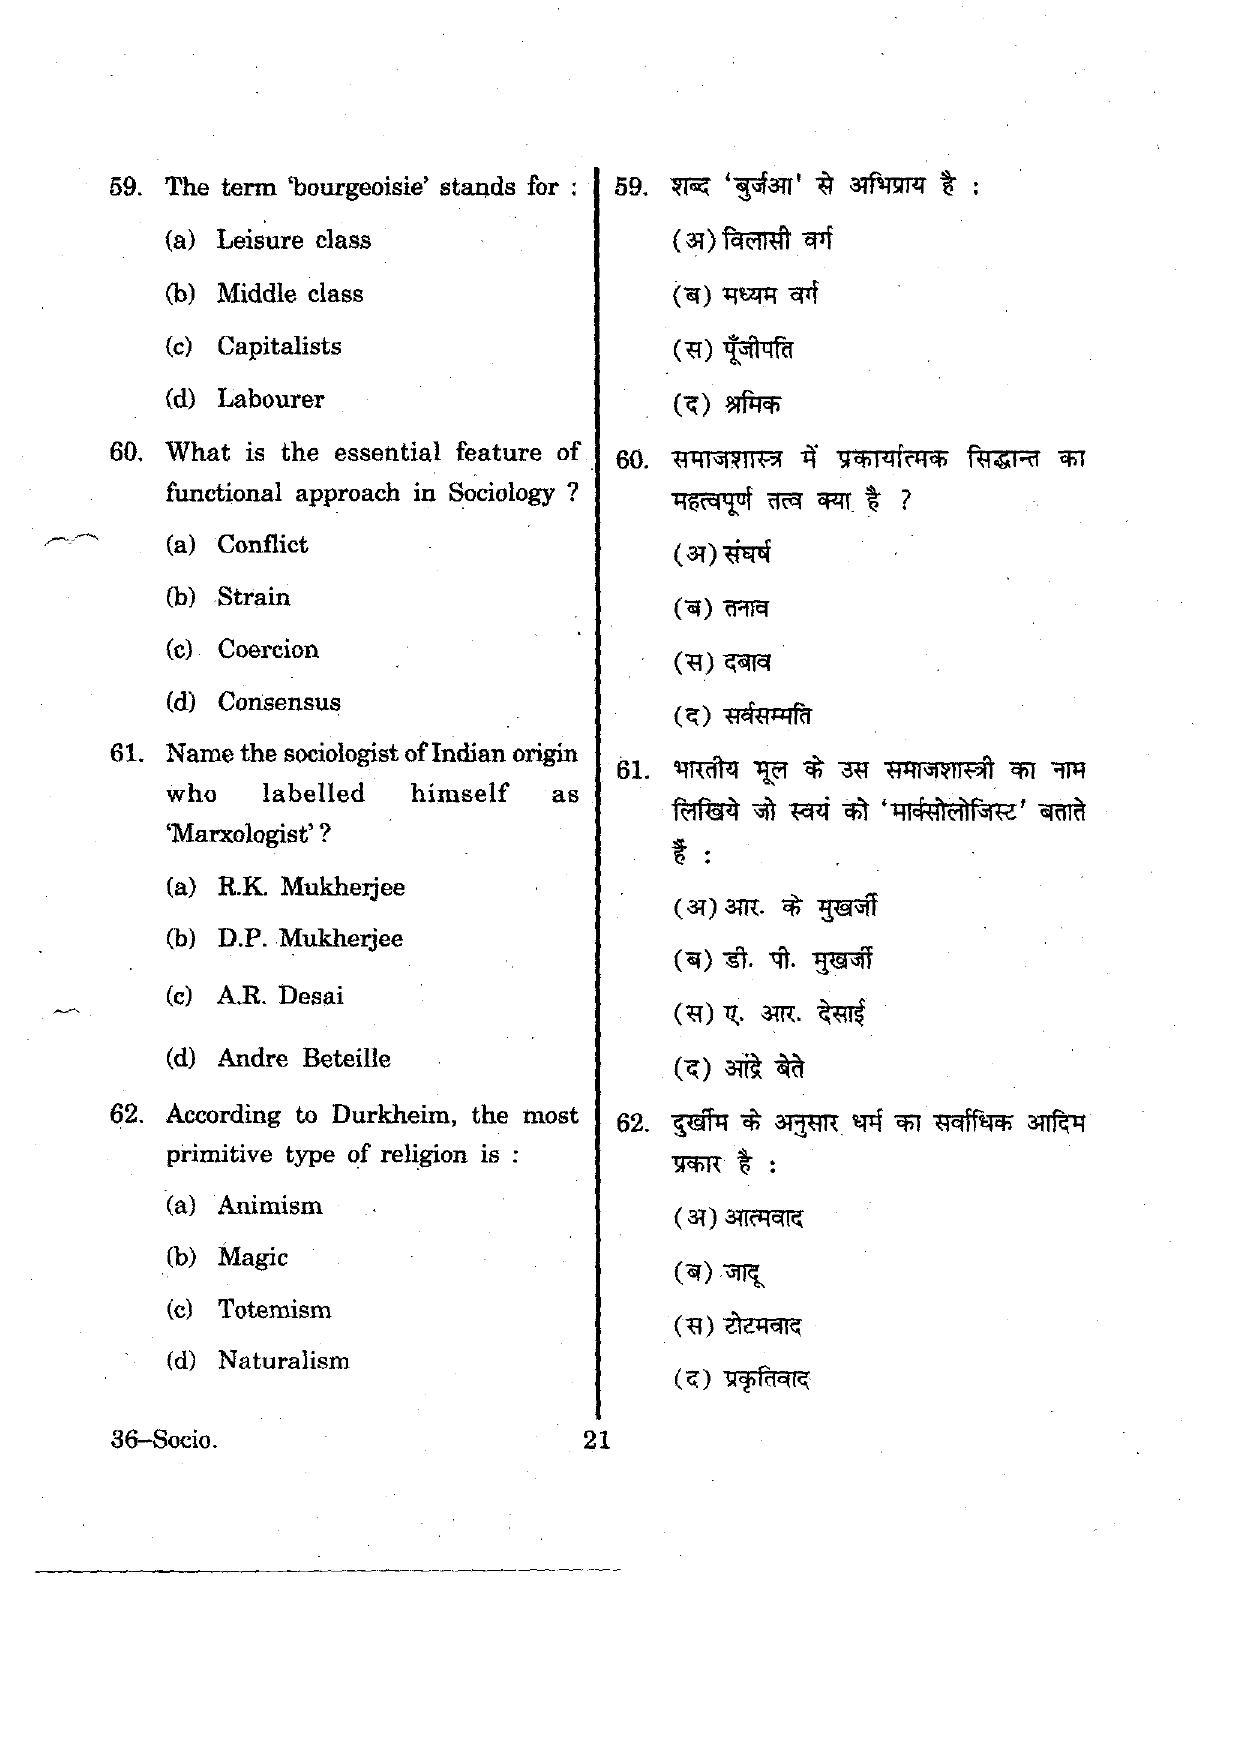 URATPG Sociology 2012 Question Paper - Page 21